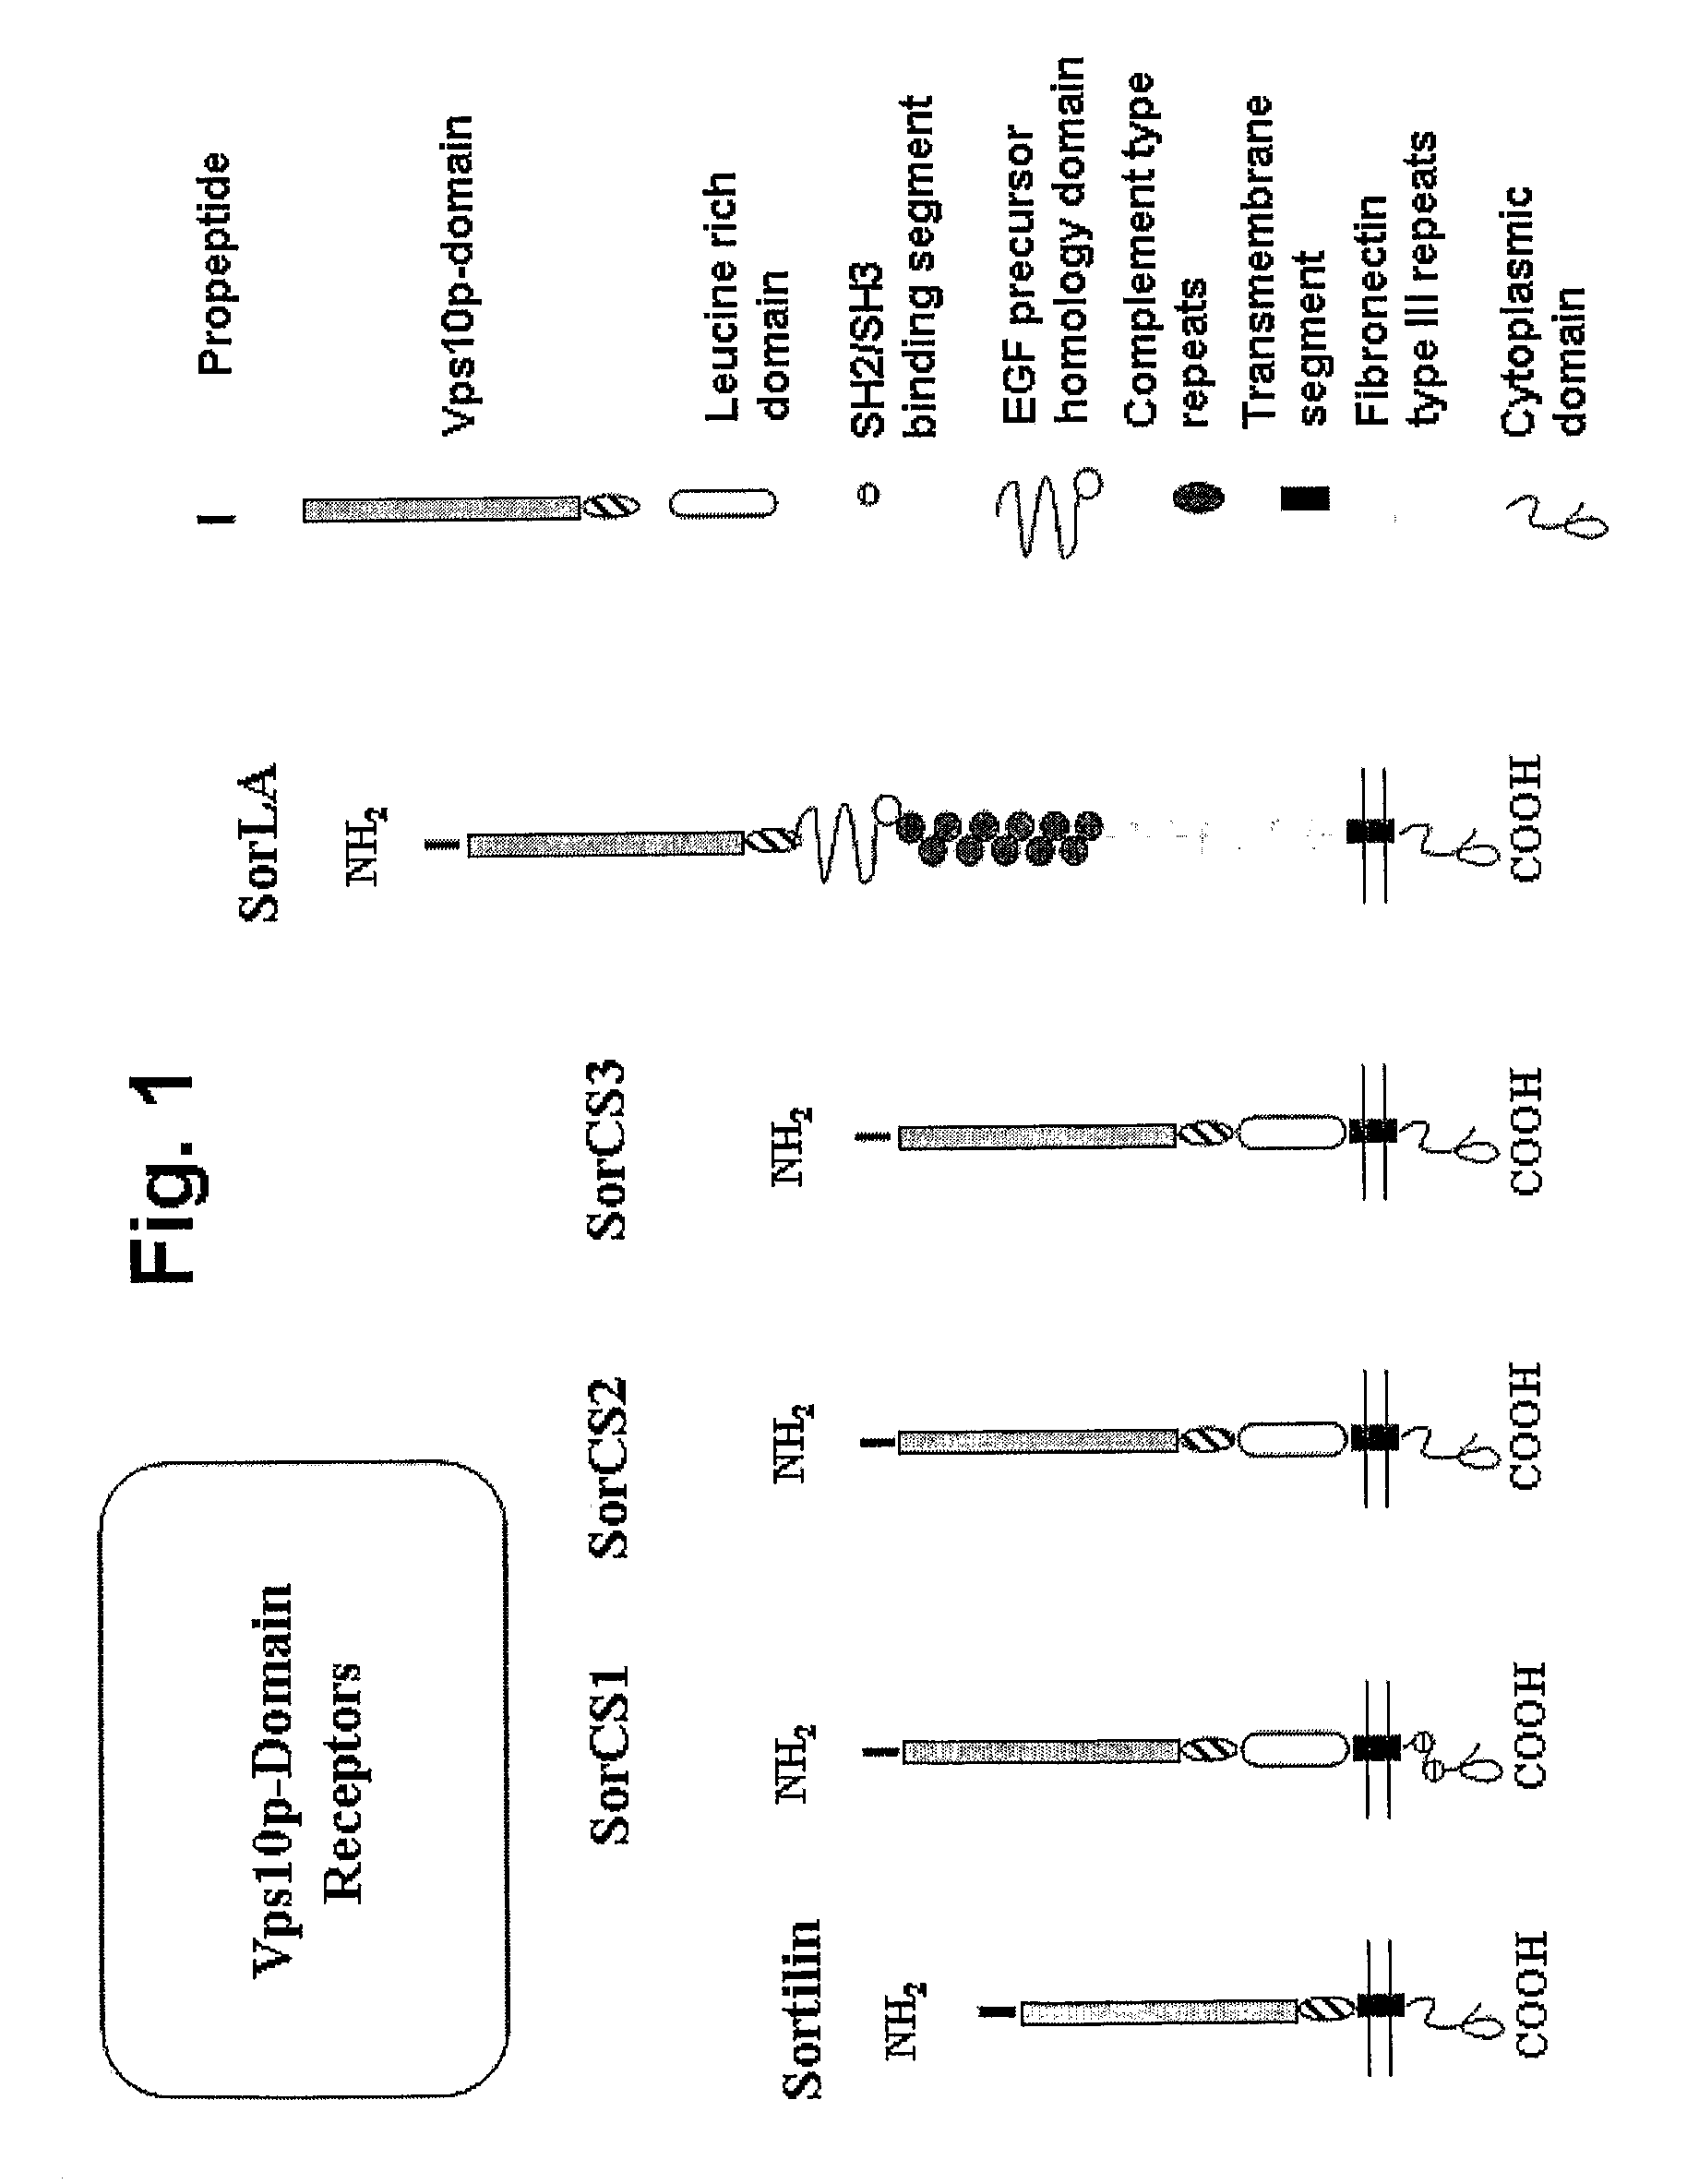 Modulation of activity of proneurotrophins